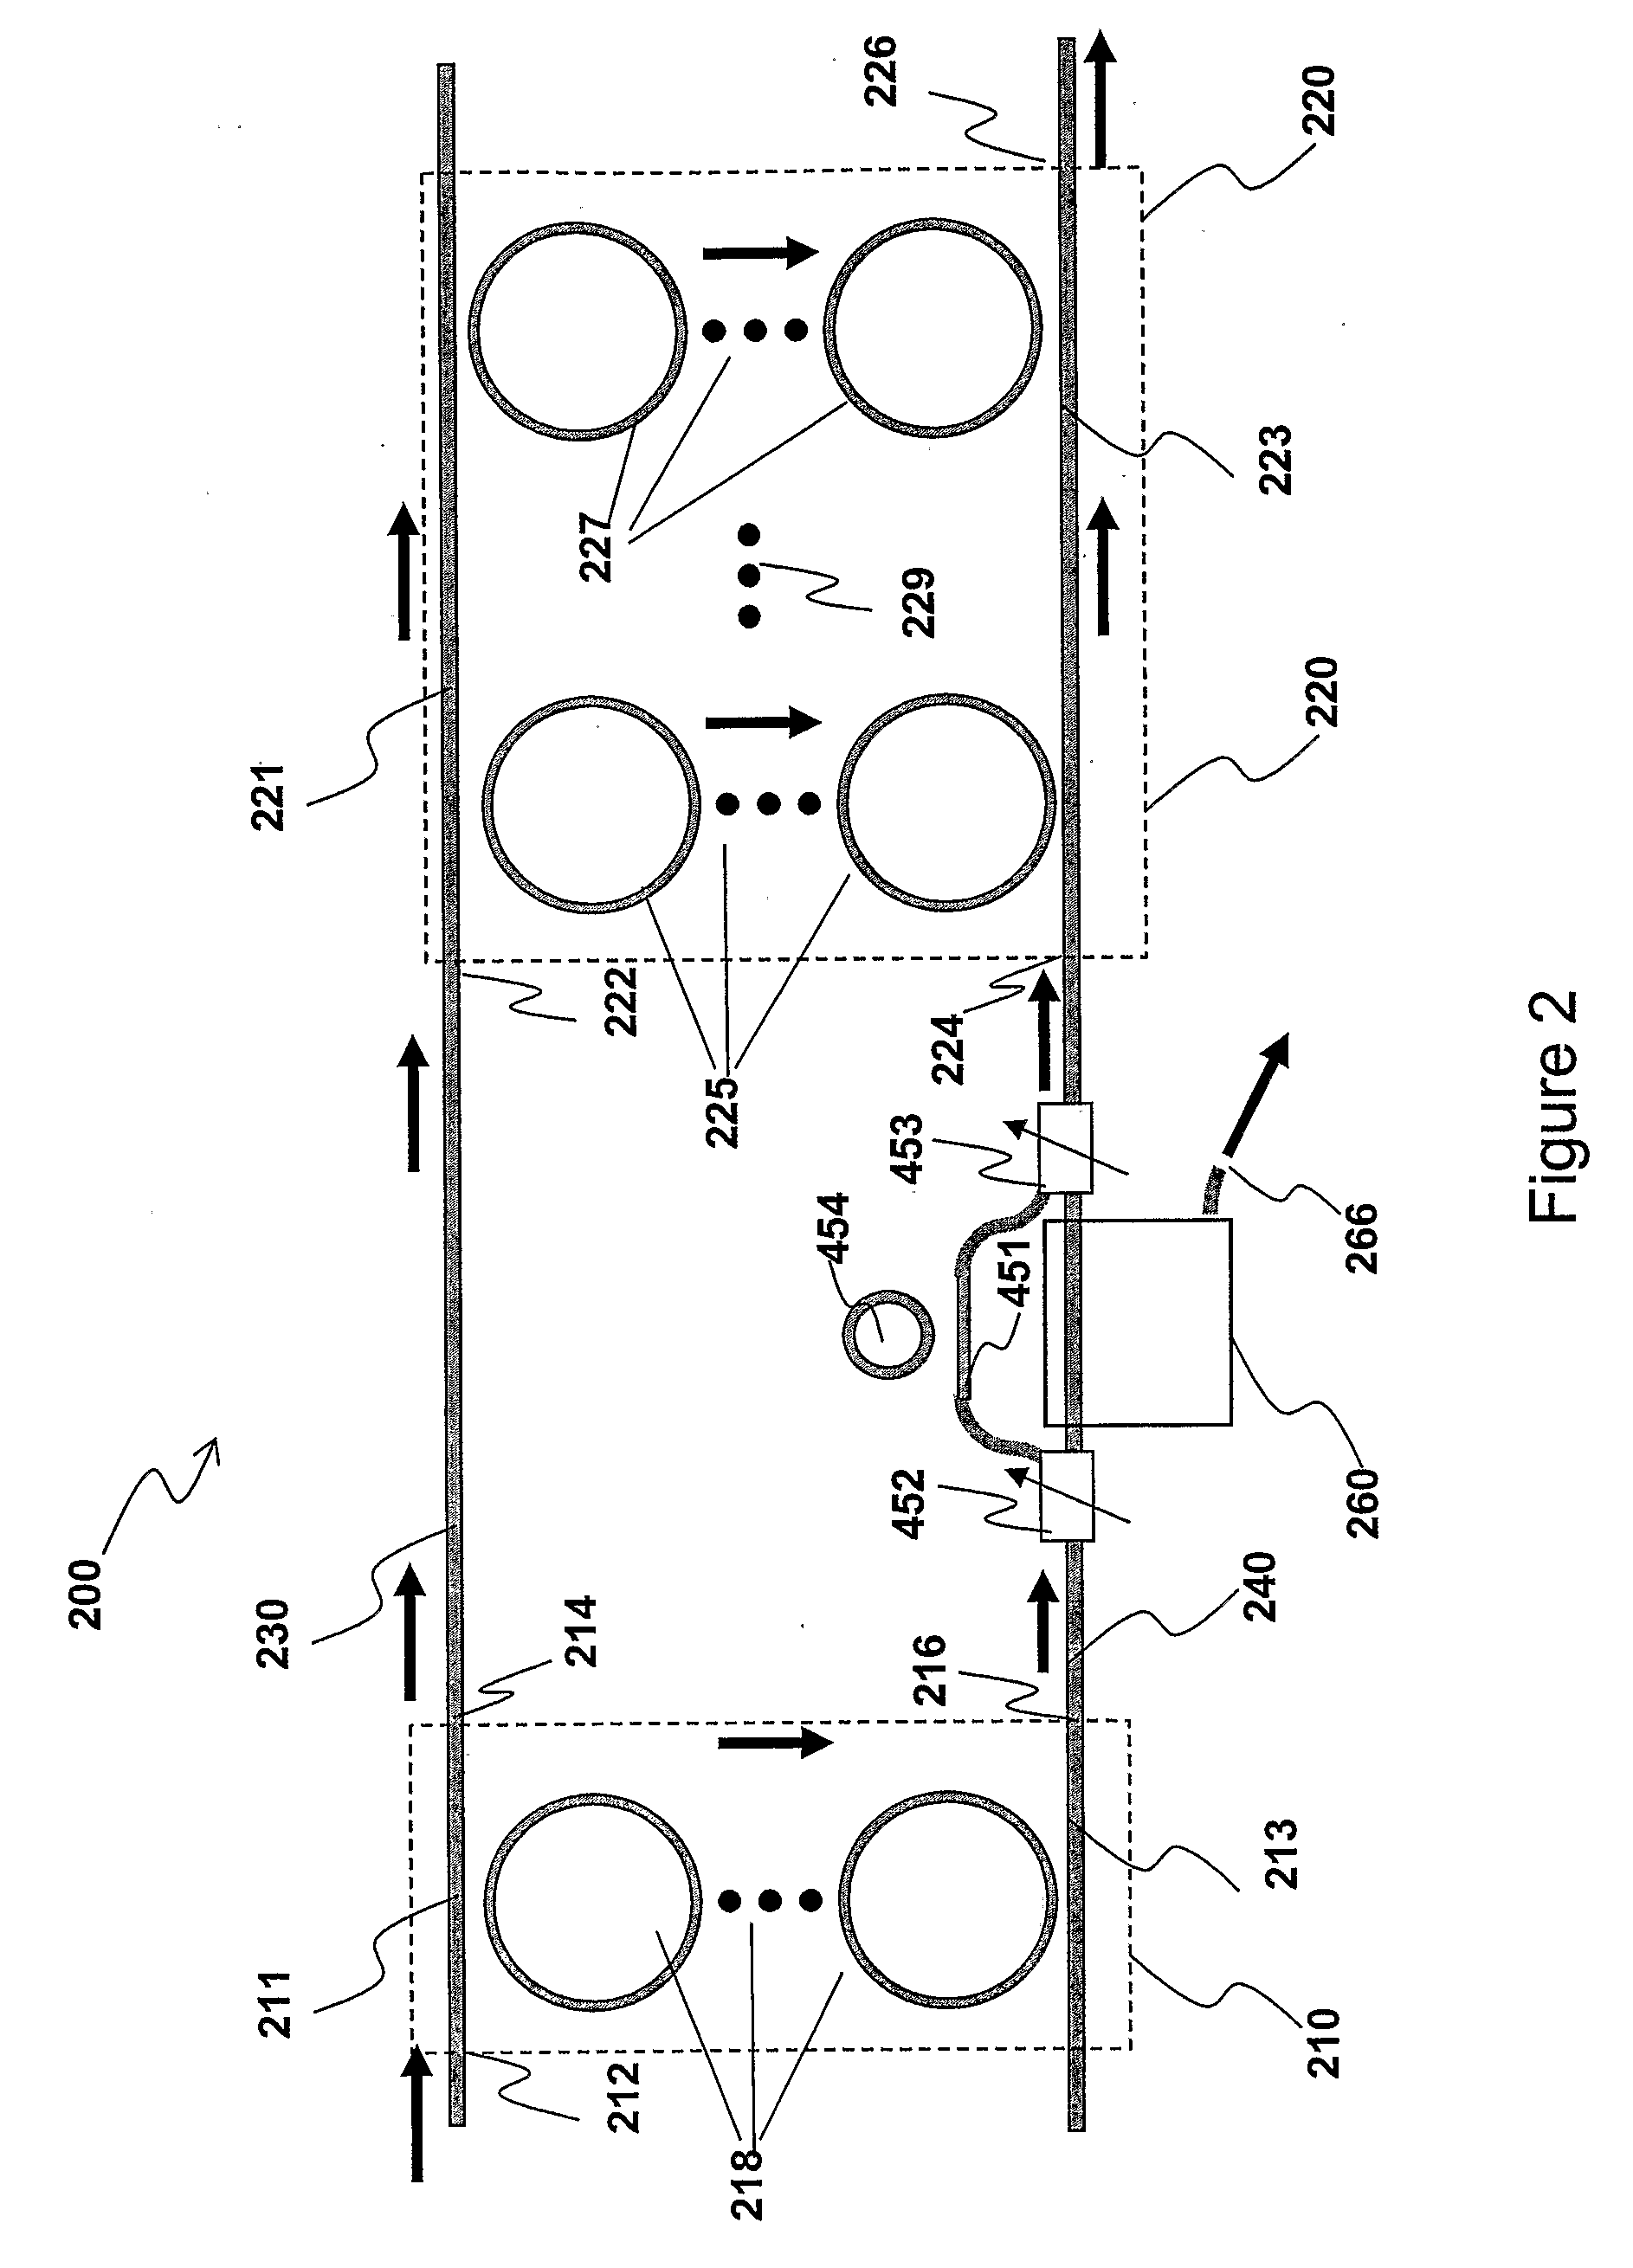 Method and Device for Tunable Optical Filtering